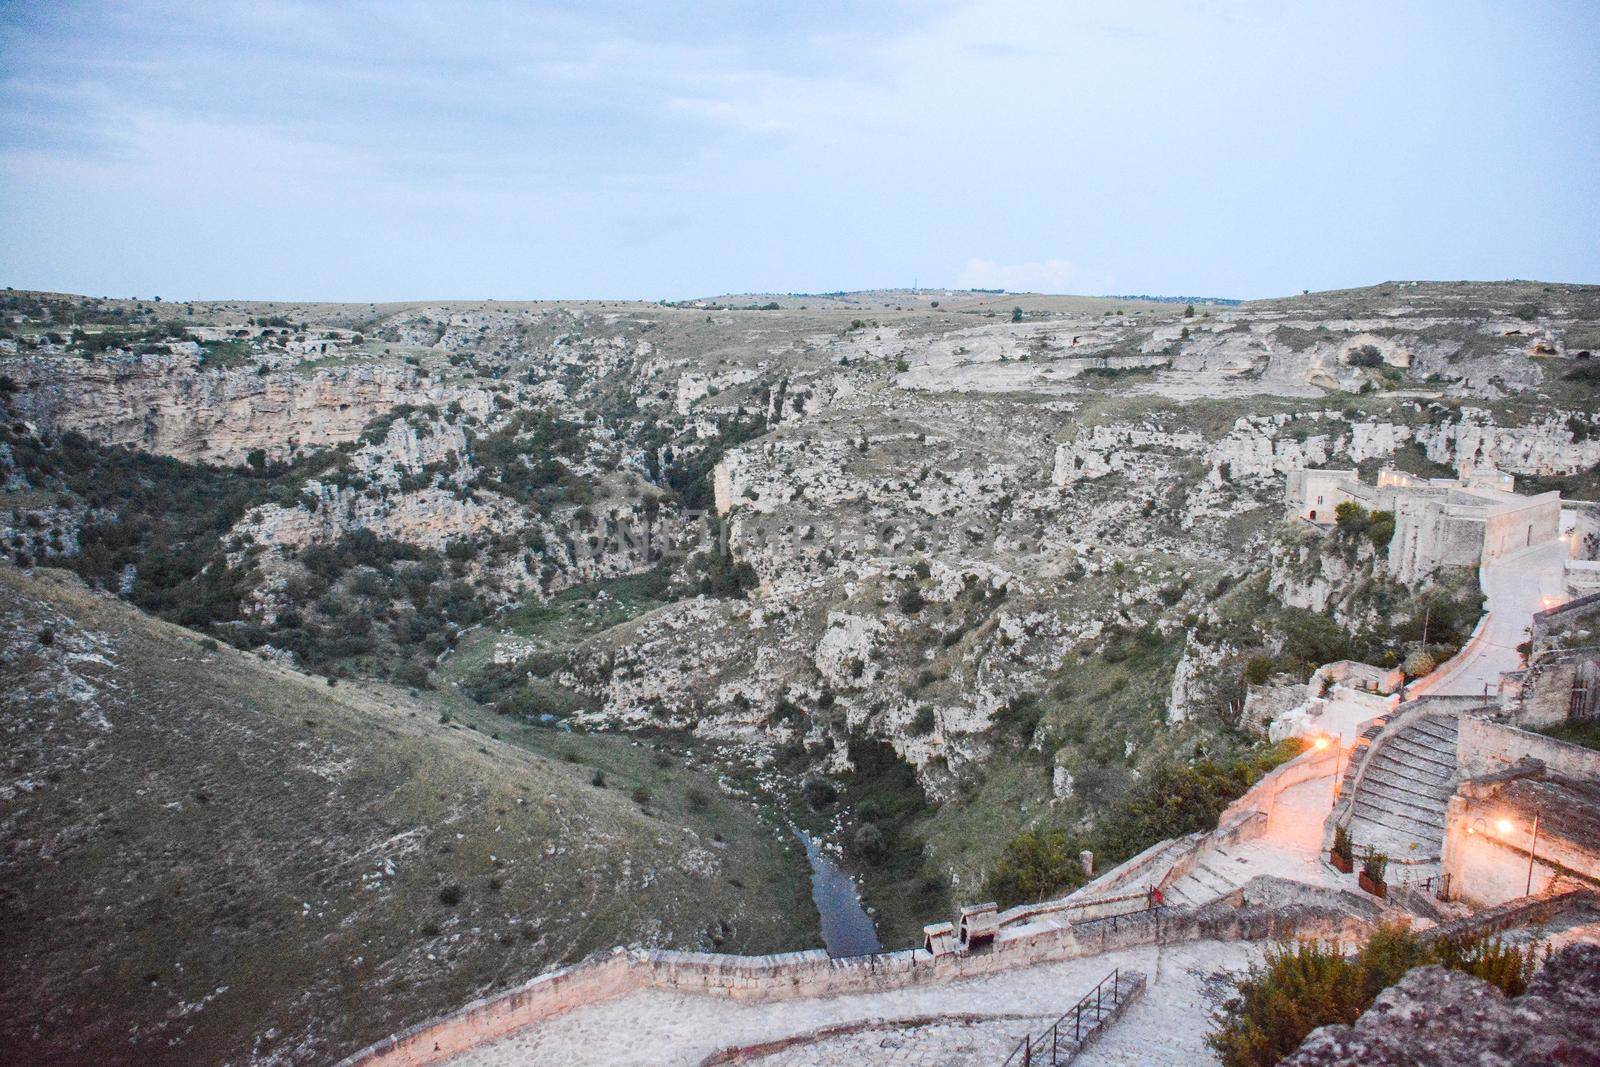  matera, a tuff quarry on which the city has arisen since prehistoric times